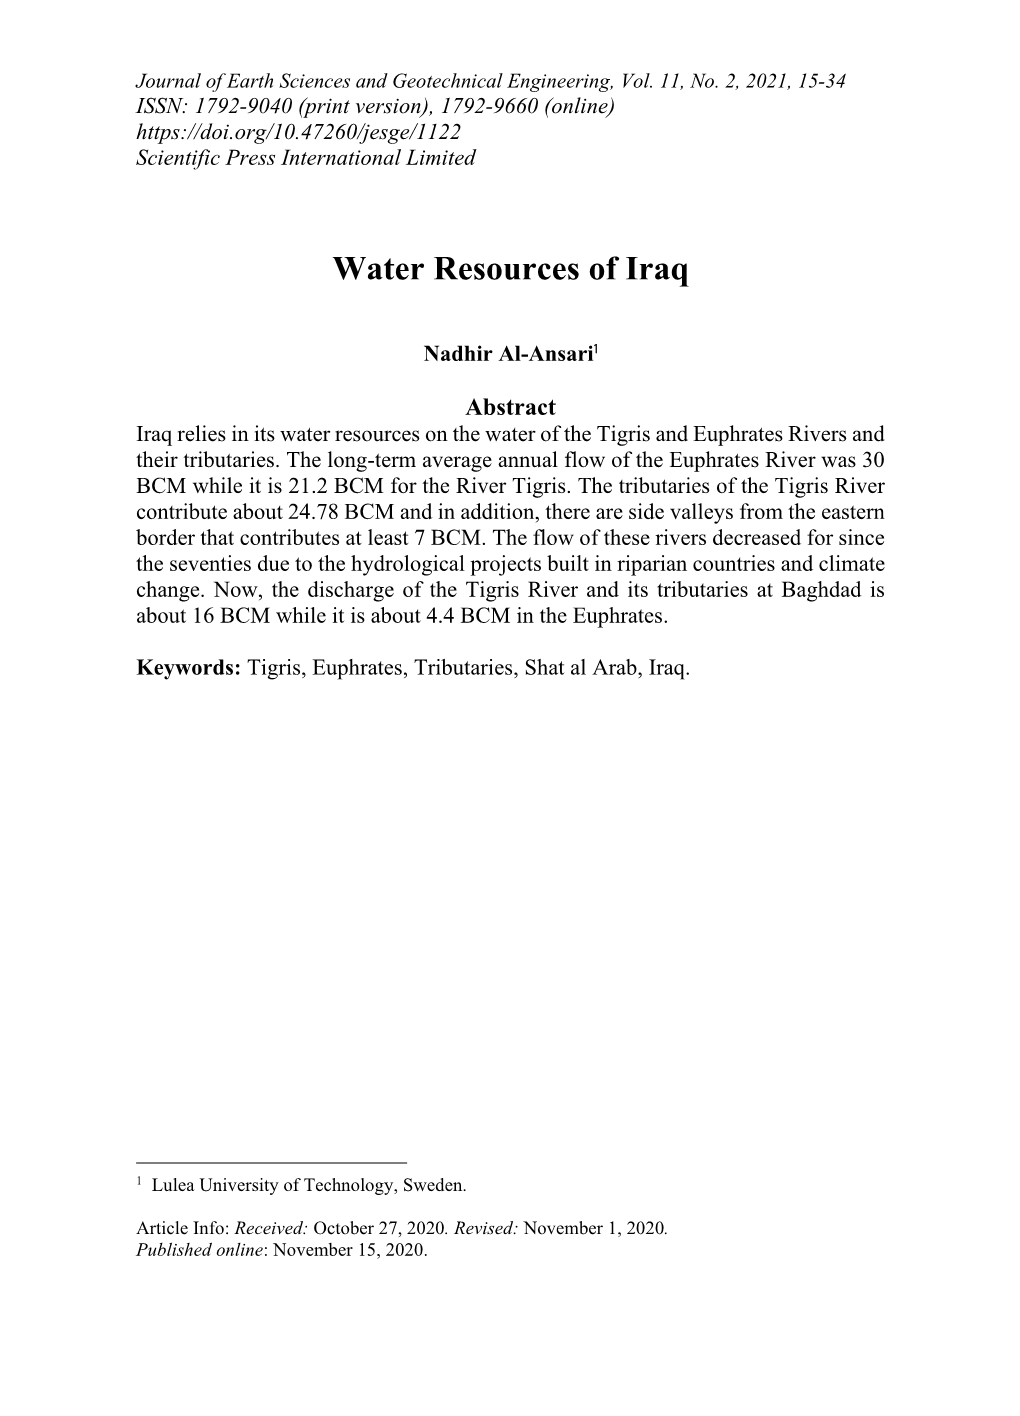 Water Resources of Iraq